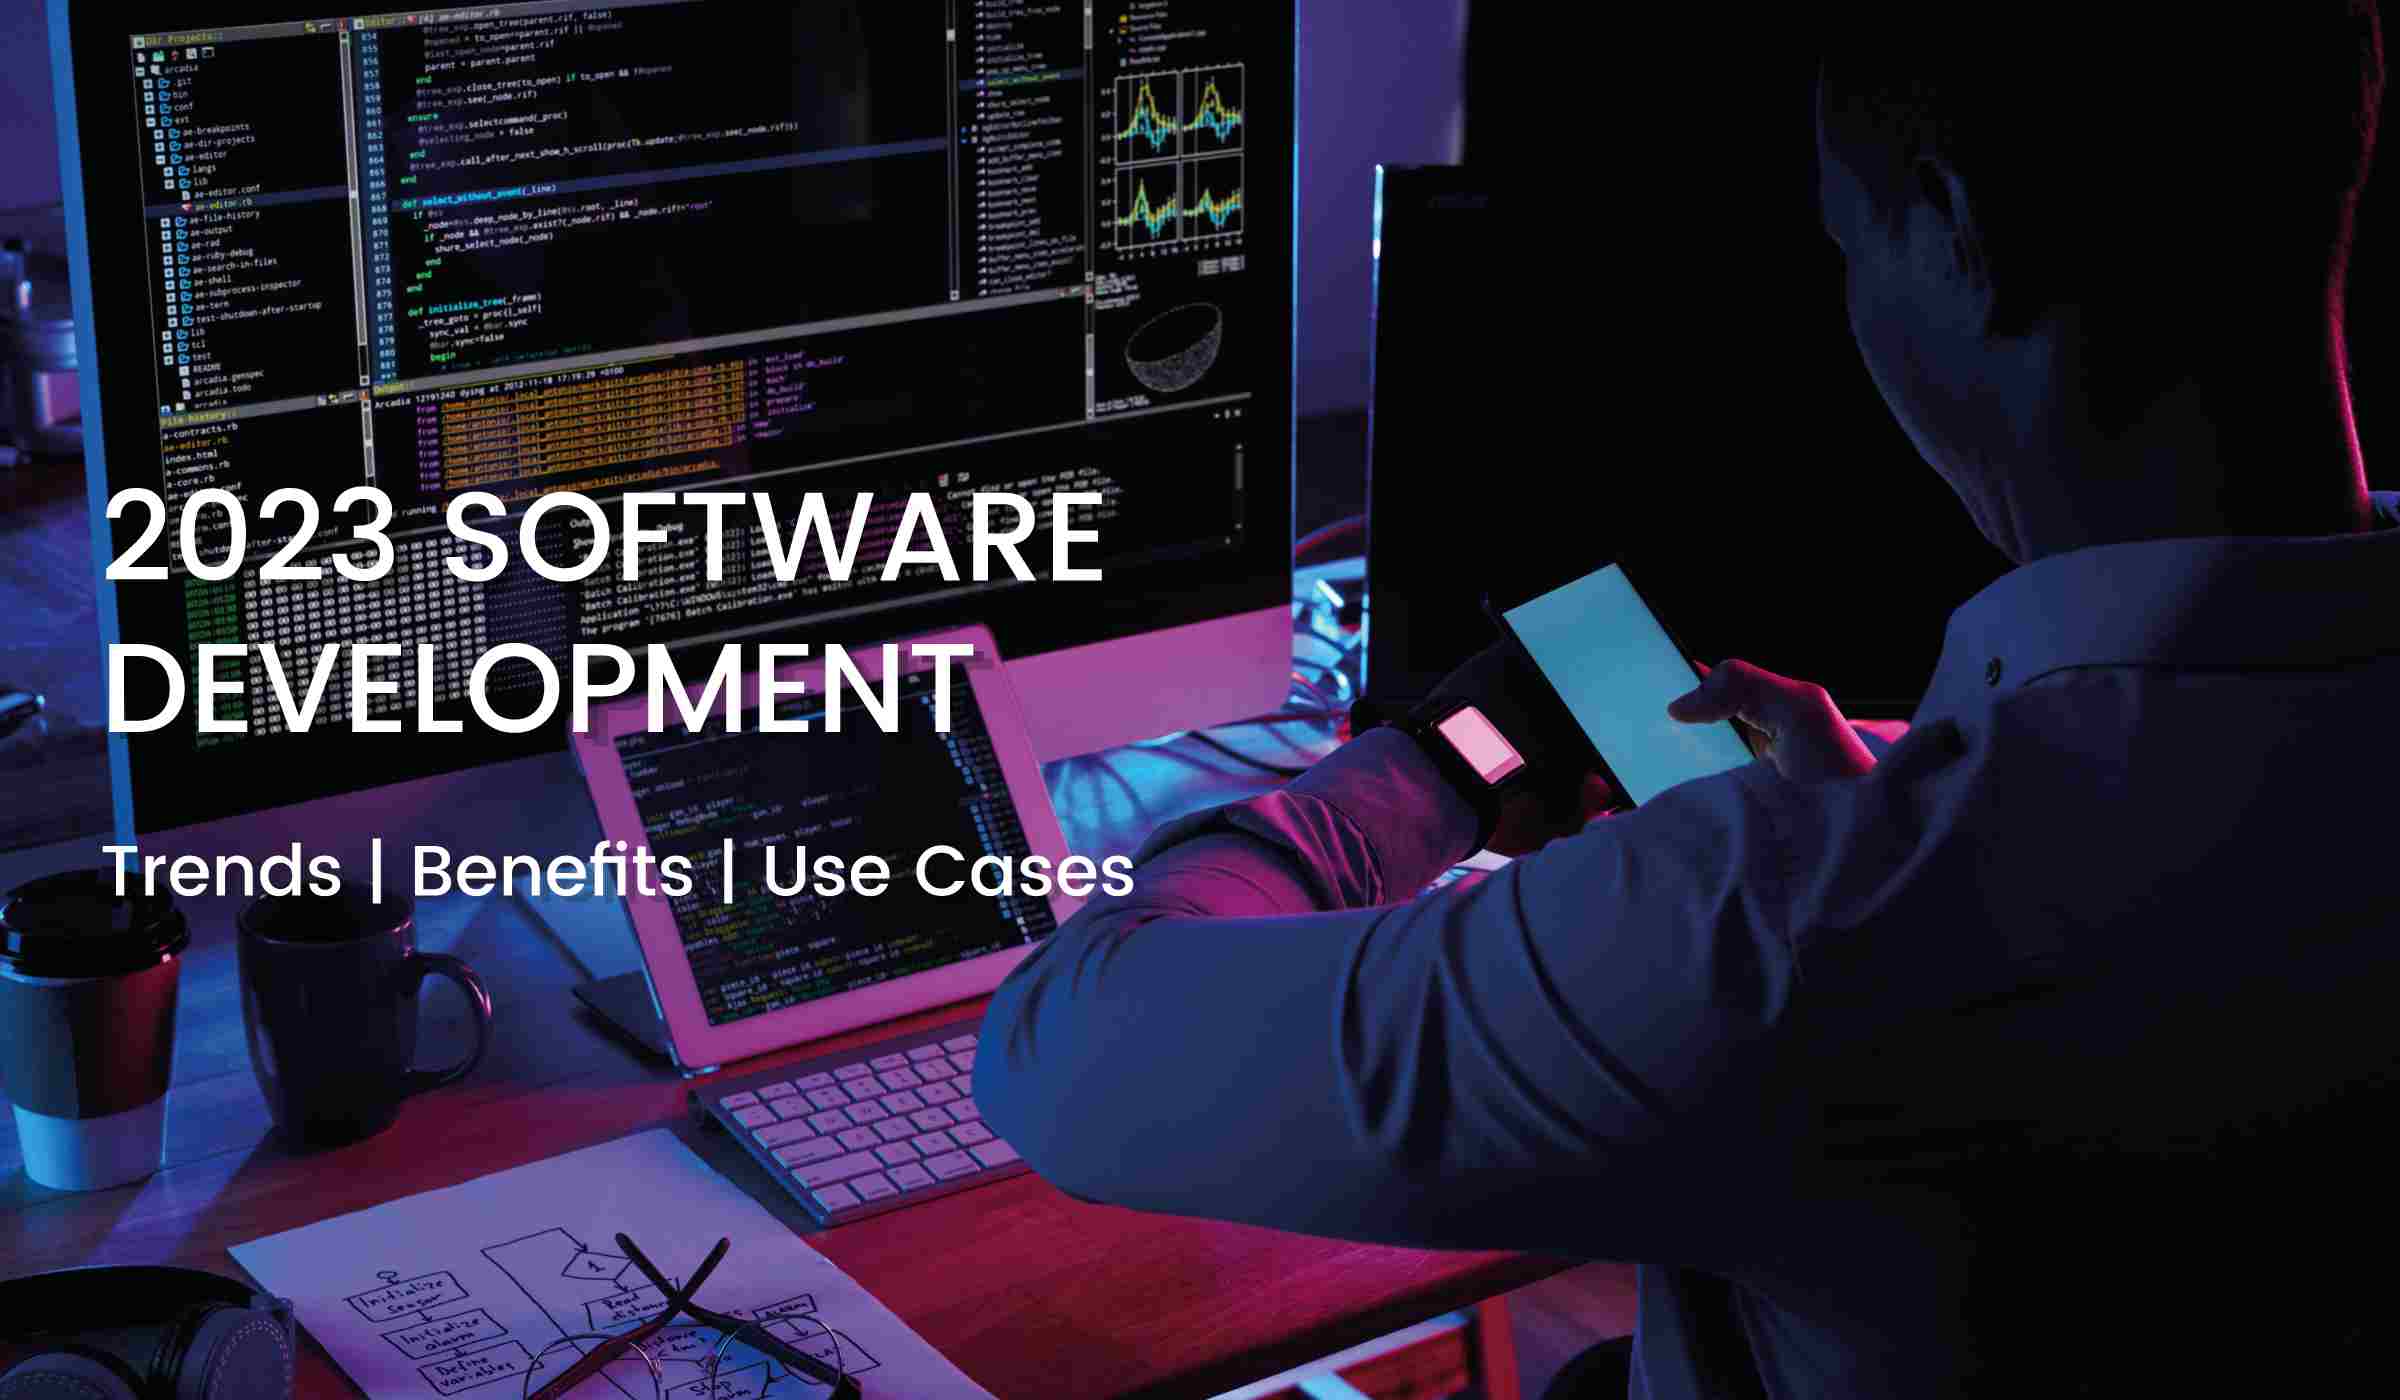 2023 Software Development Trends | Benefits | Use Cases